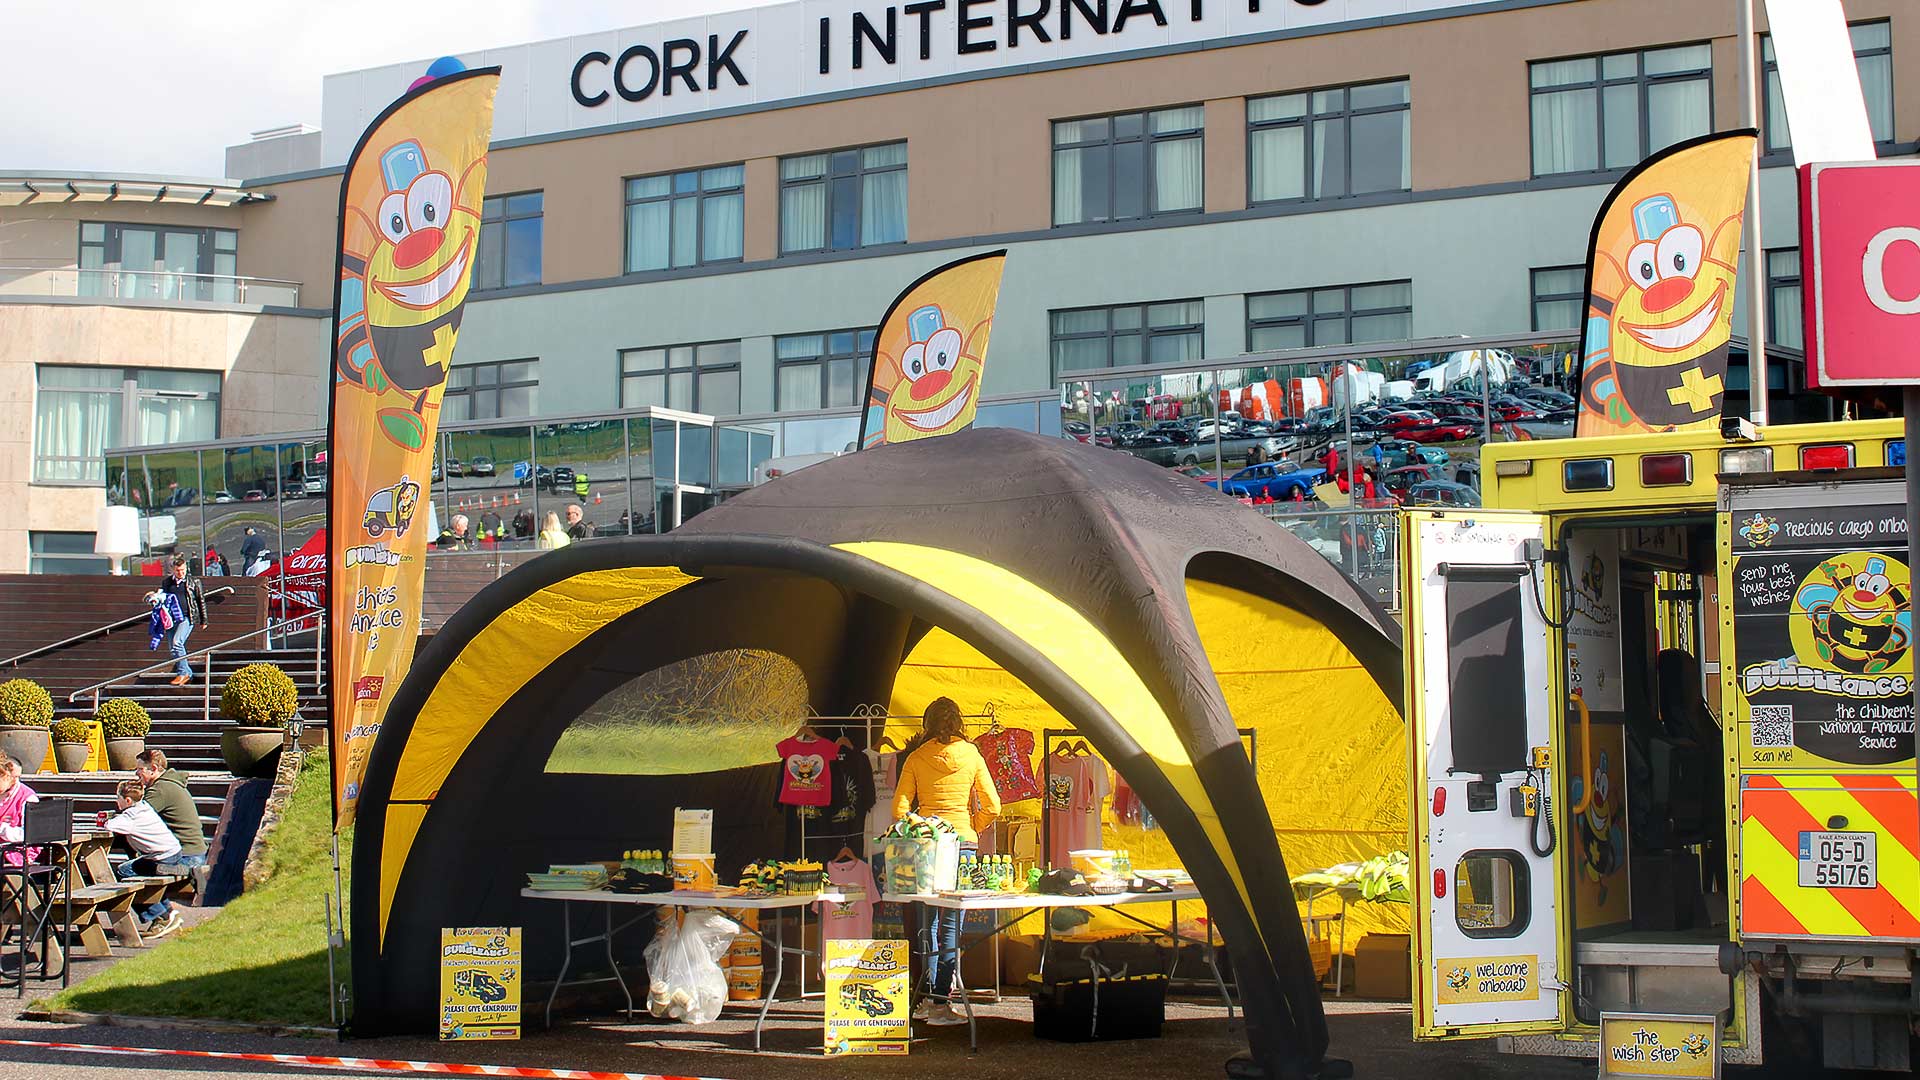 Stand and ambulance promoting Bumbleance, charity partner of the Cork International hotel